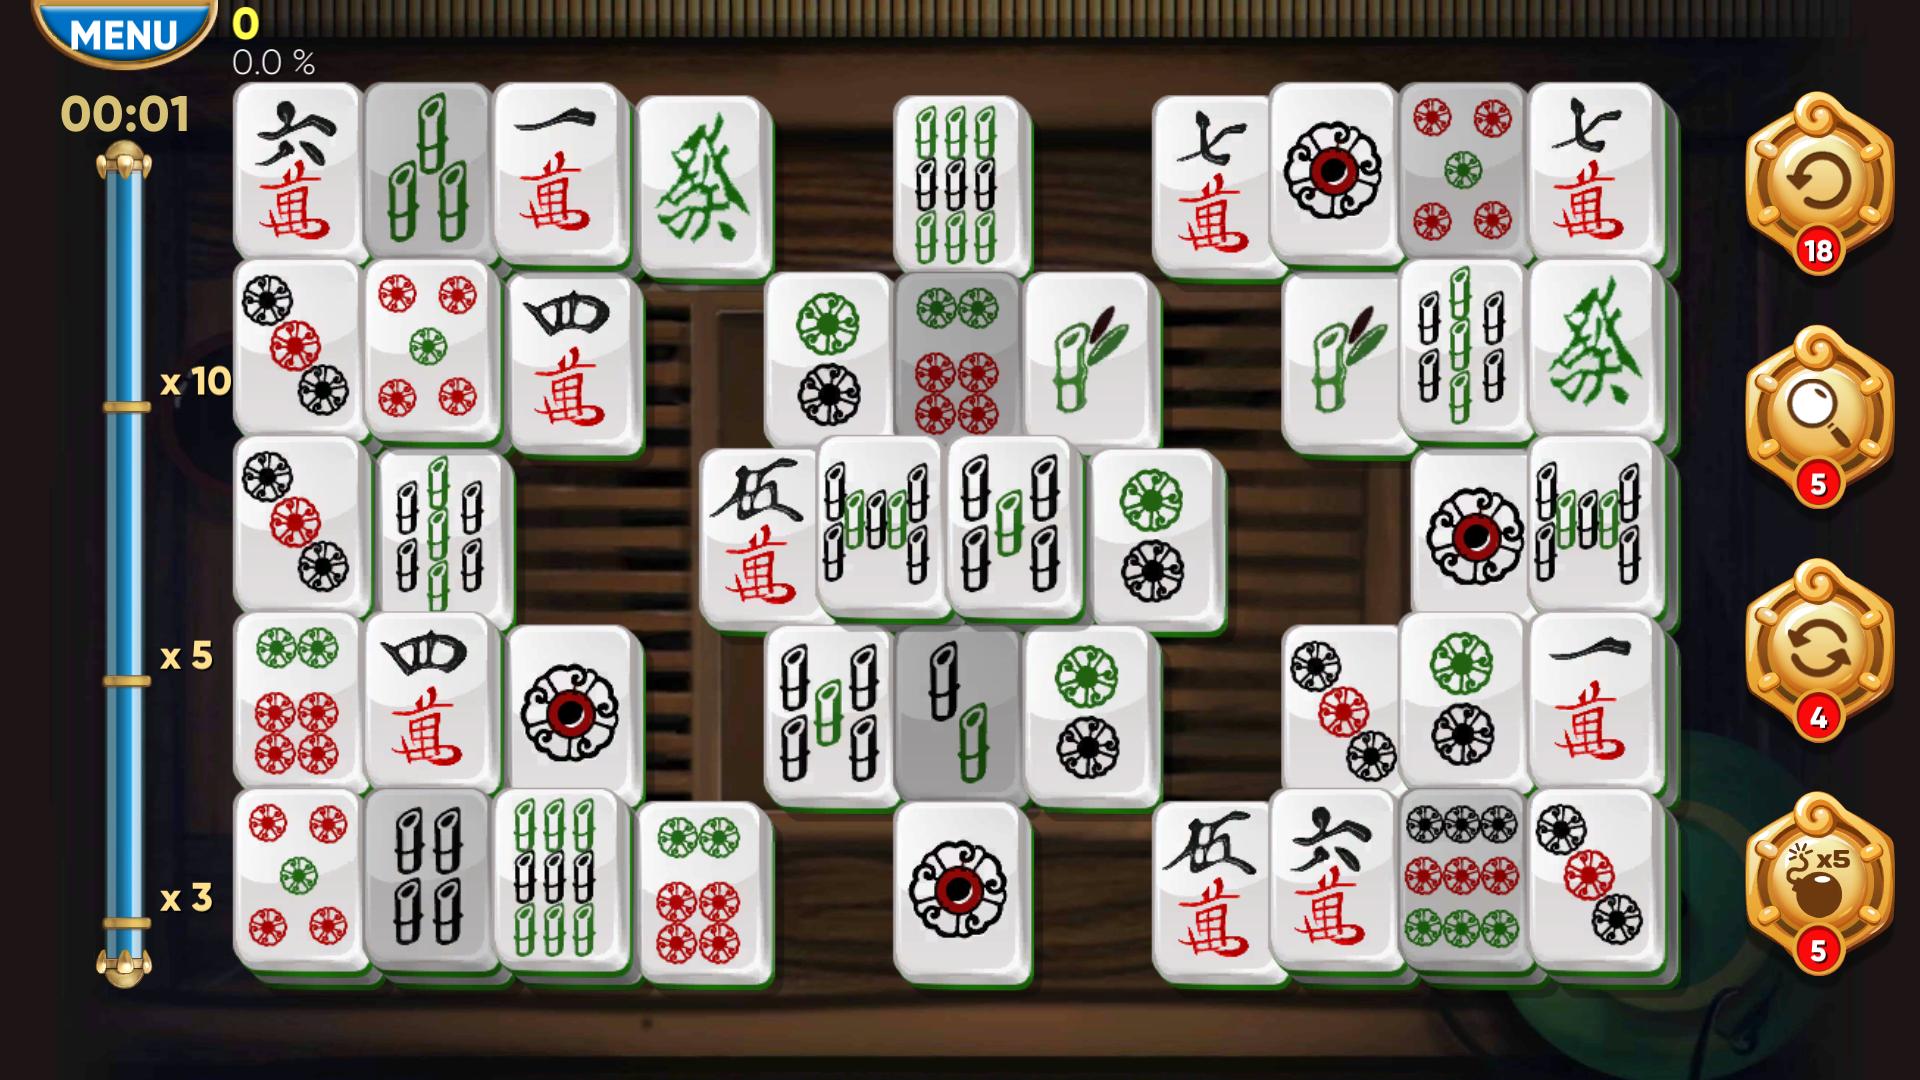 Mahjong Adventures for Android - APK Download